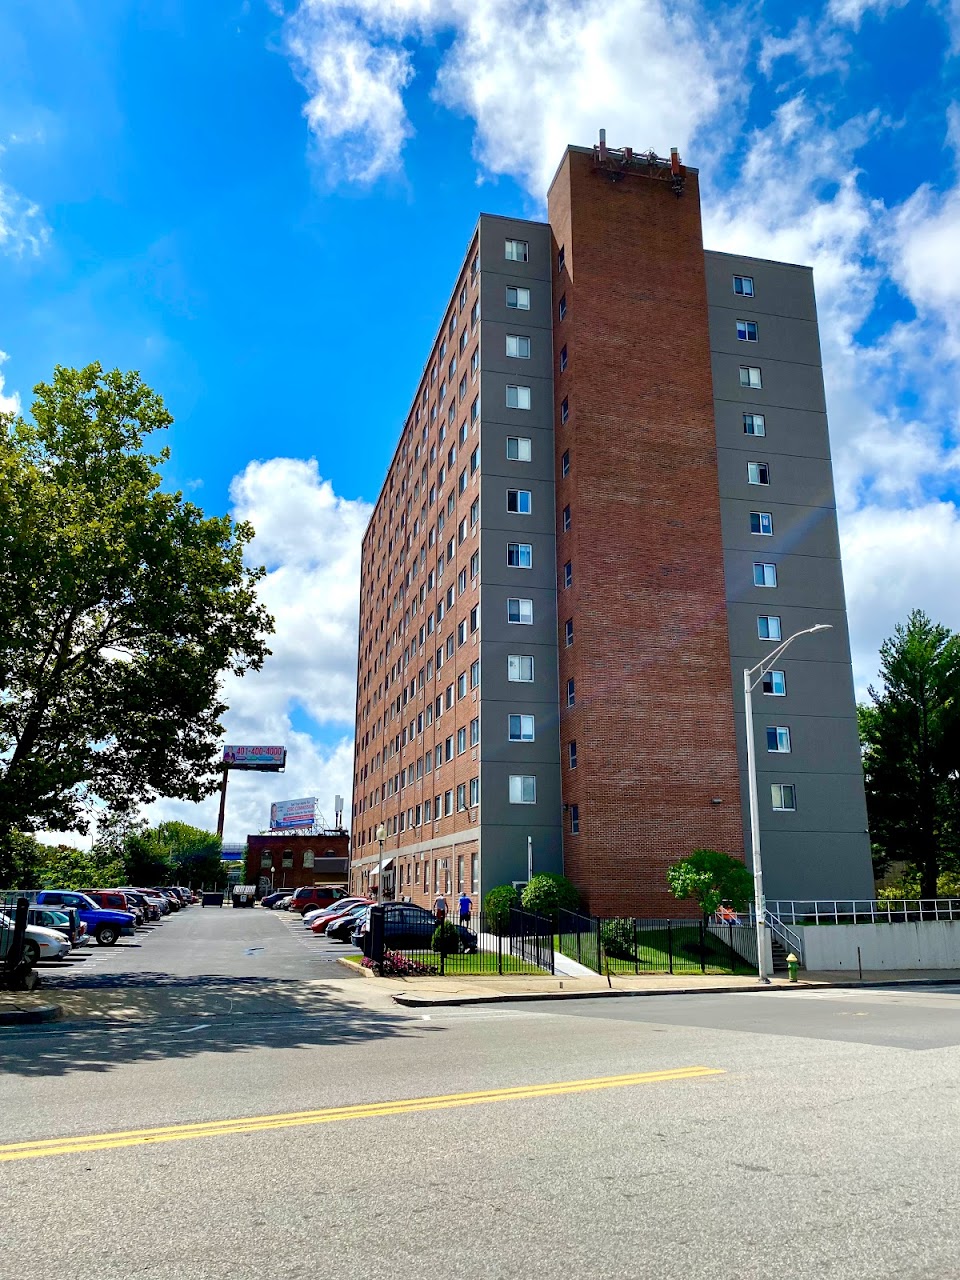 Photo of VALLEY APTS (TRIO SISTERS) at 1 VALLEY ST PROVIDENCE, RI 02909